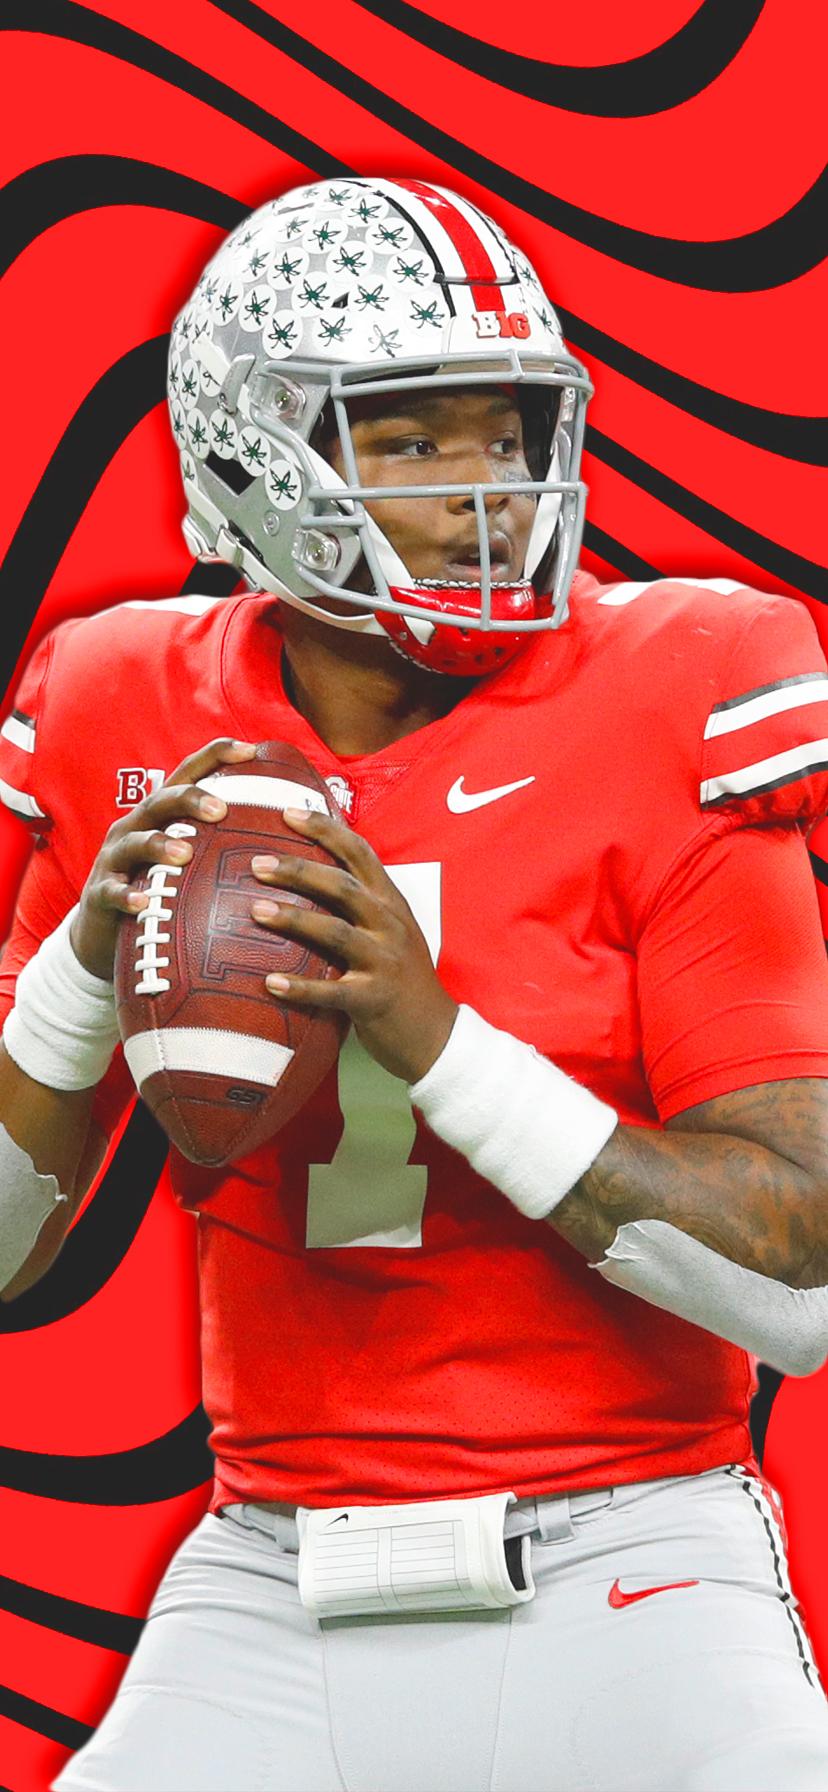 Ohio State Wallpaper For Iphone Xr - HD Wallpaper 